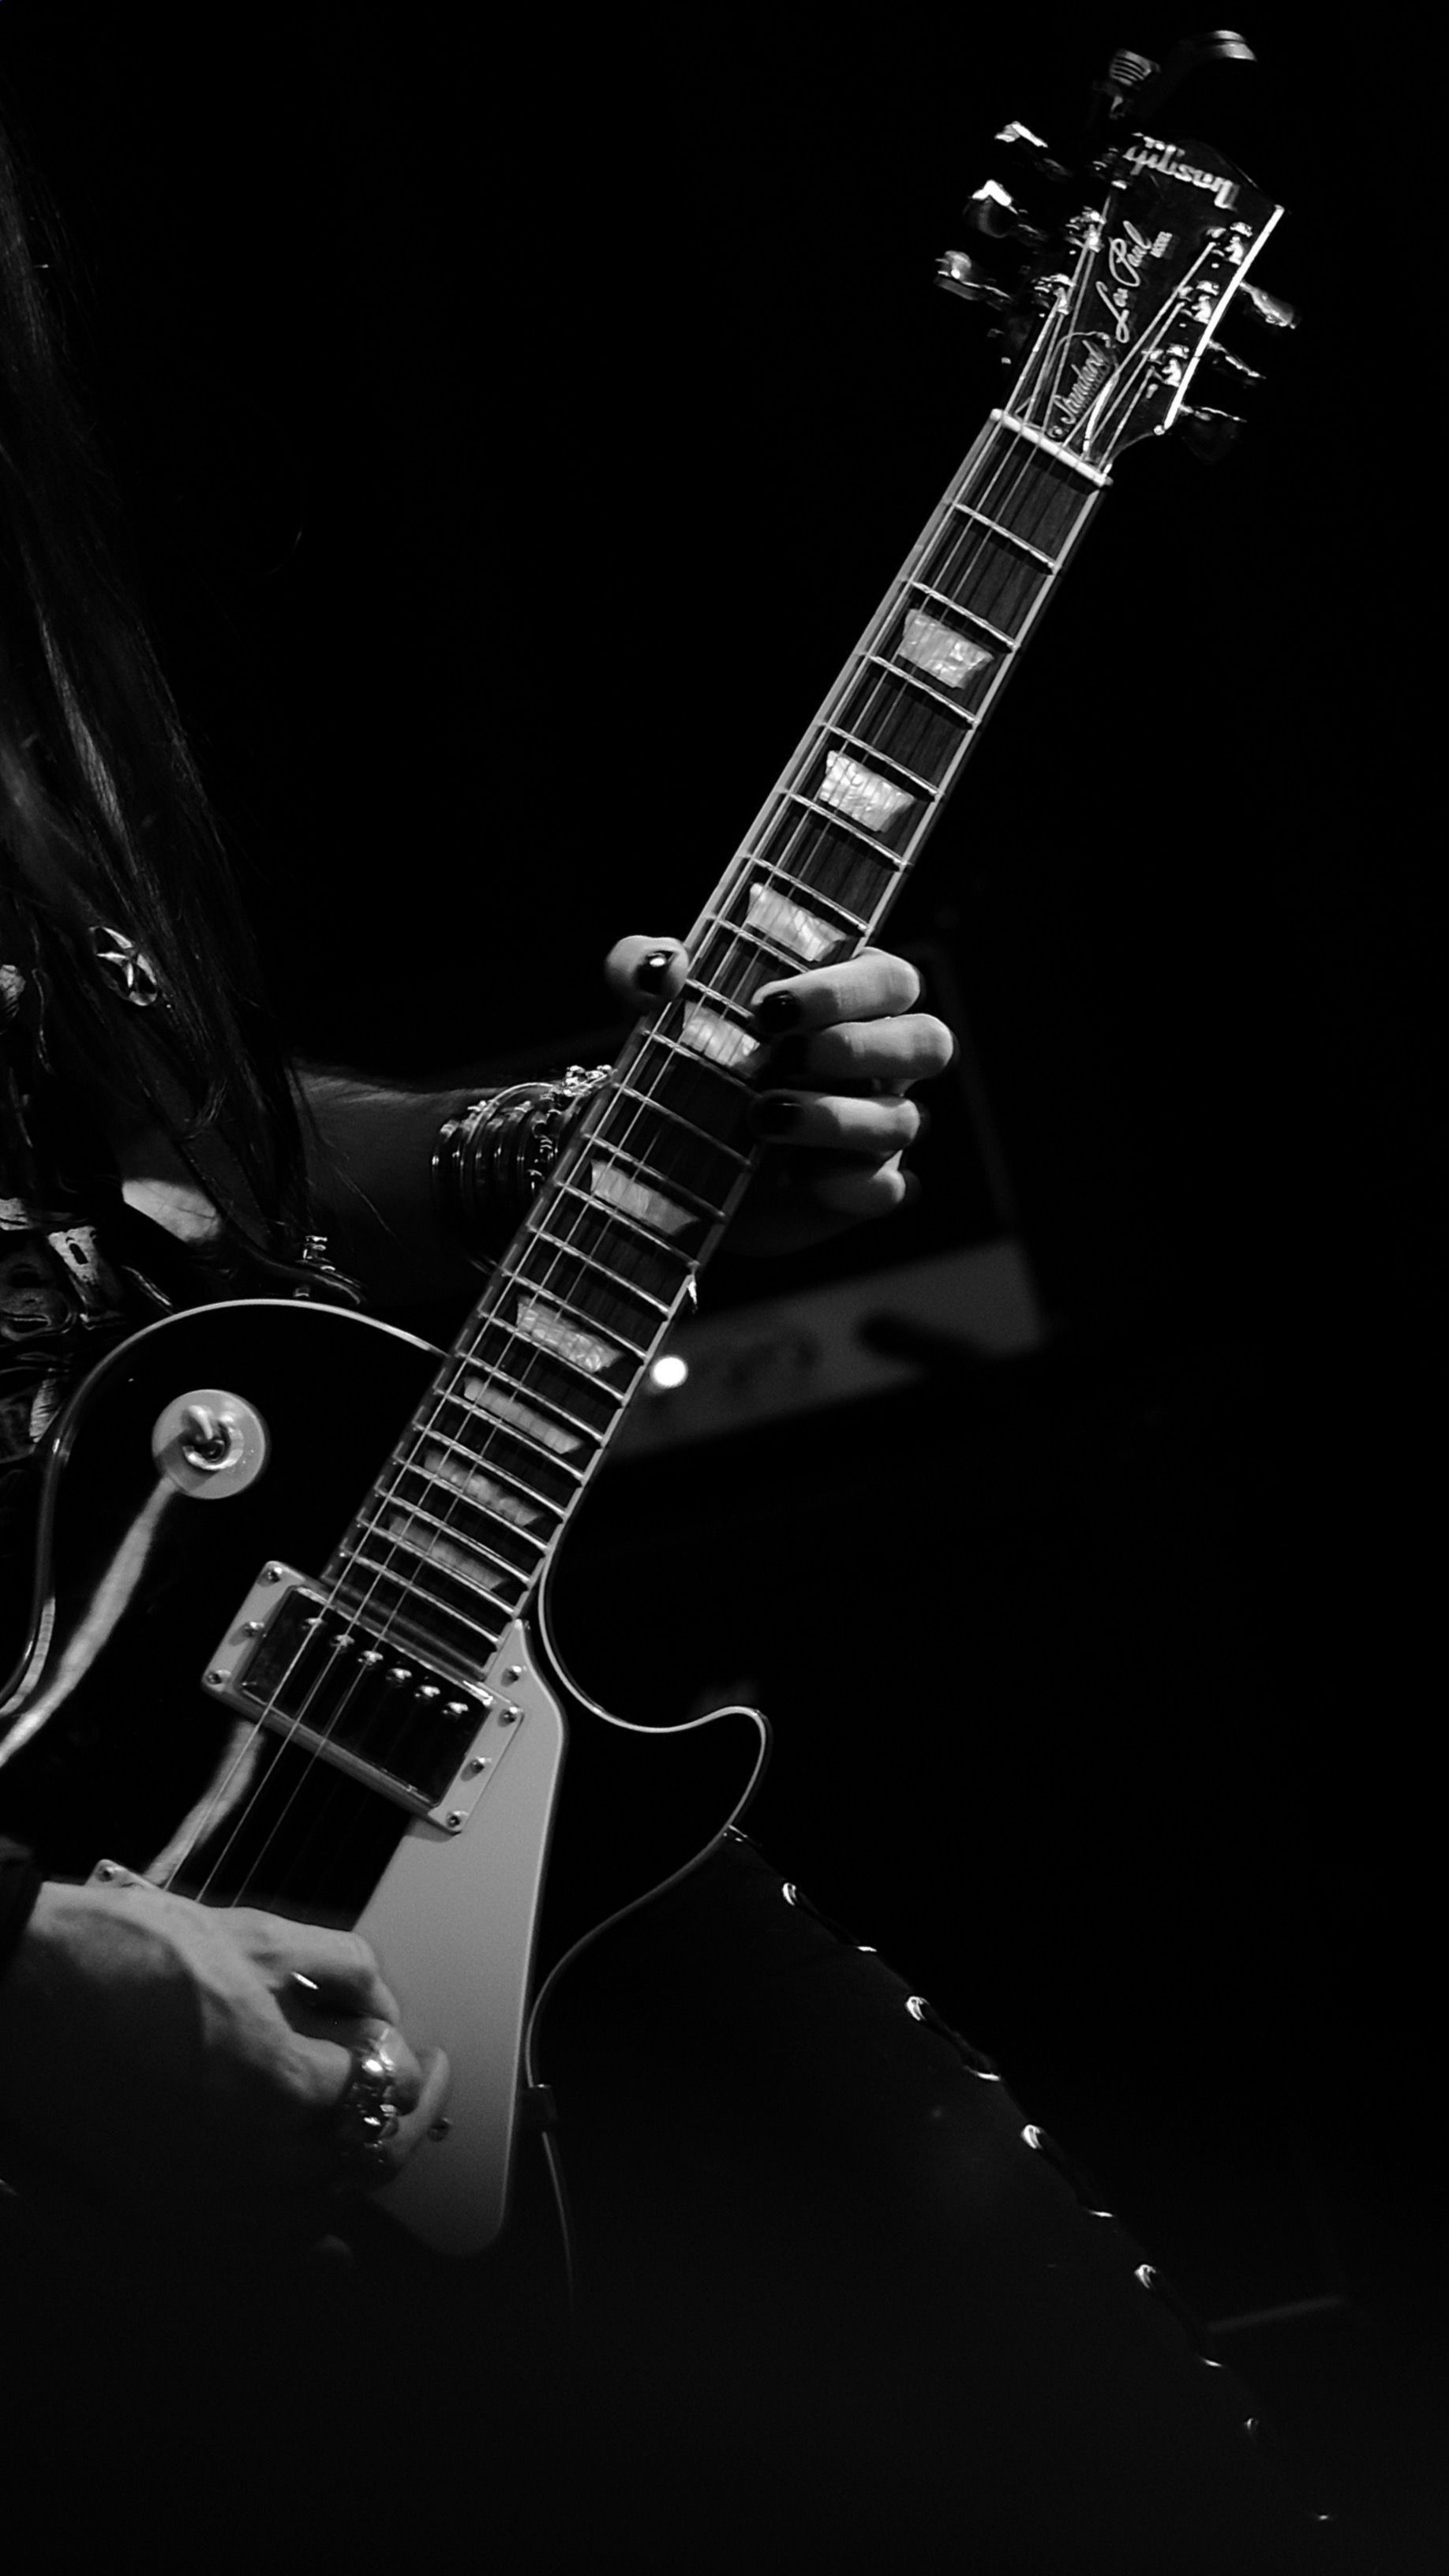 A person playing an electric guitar in black and white. - Guitar